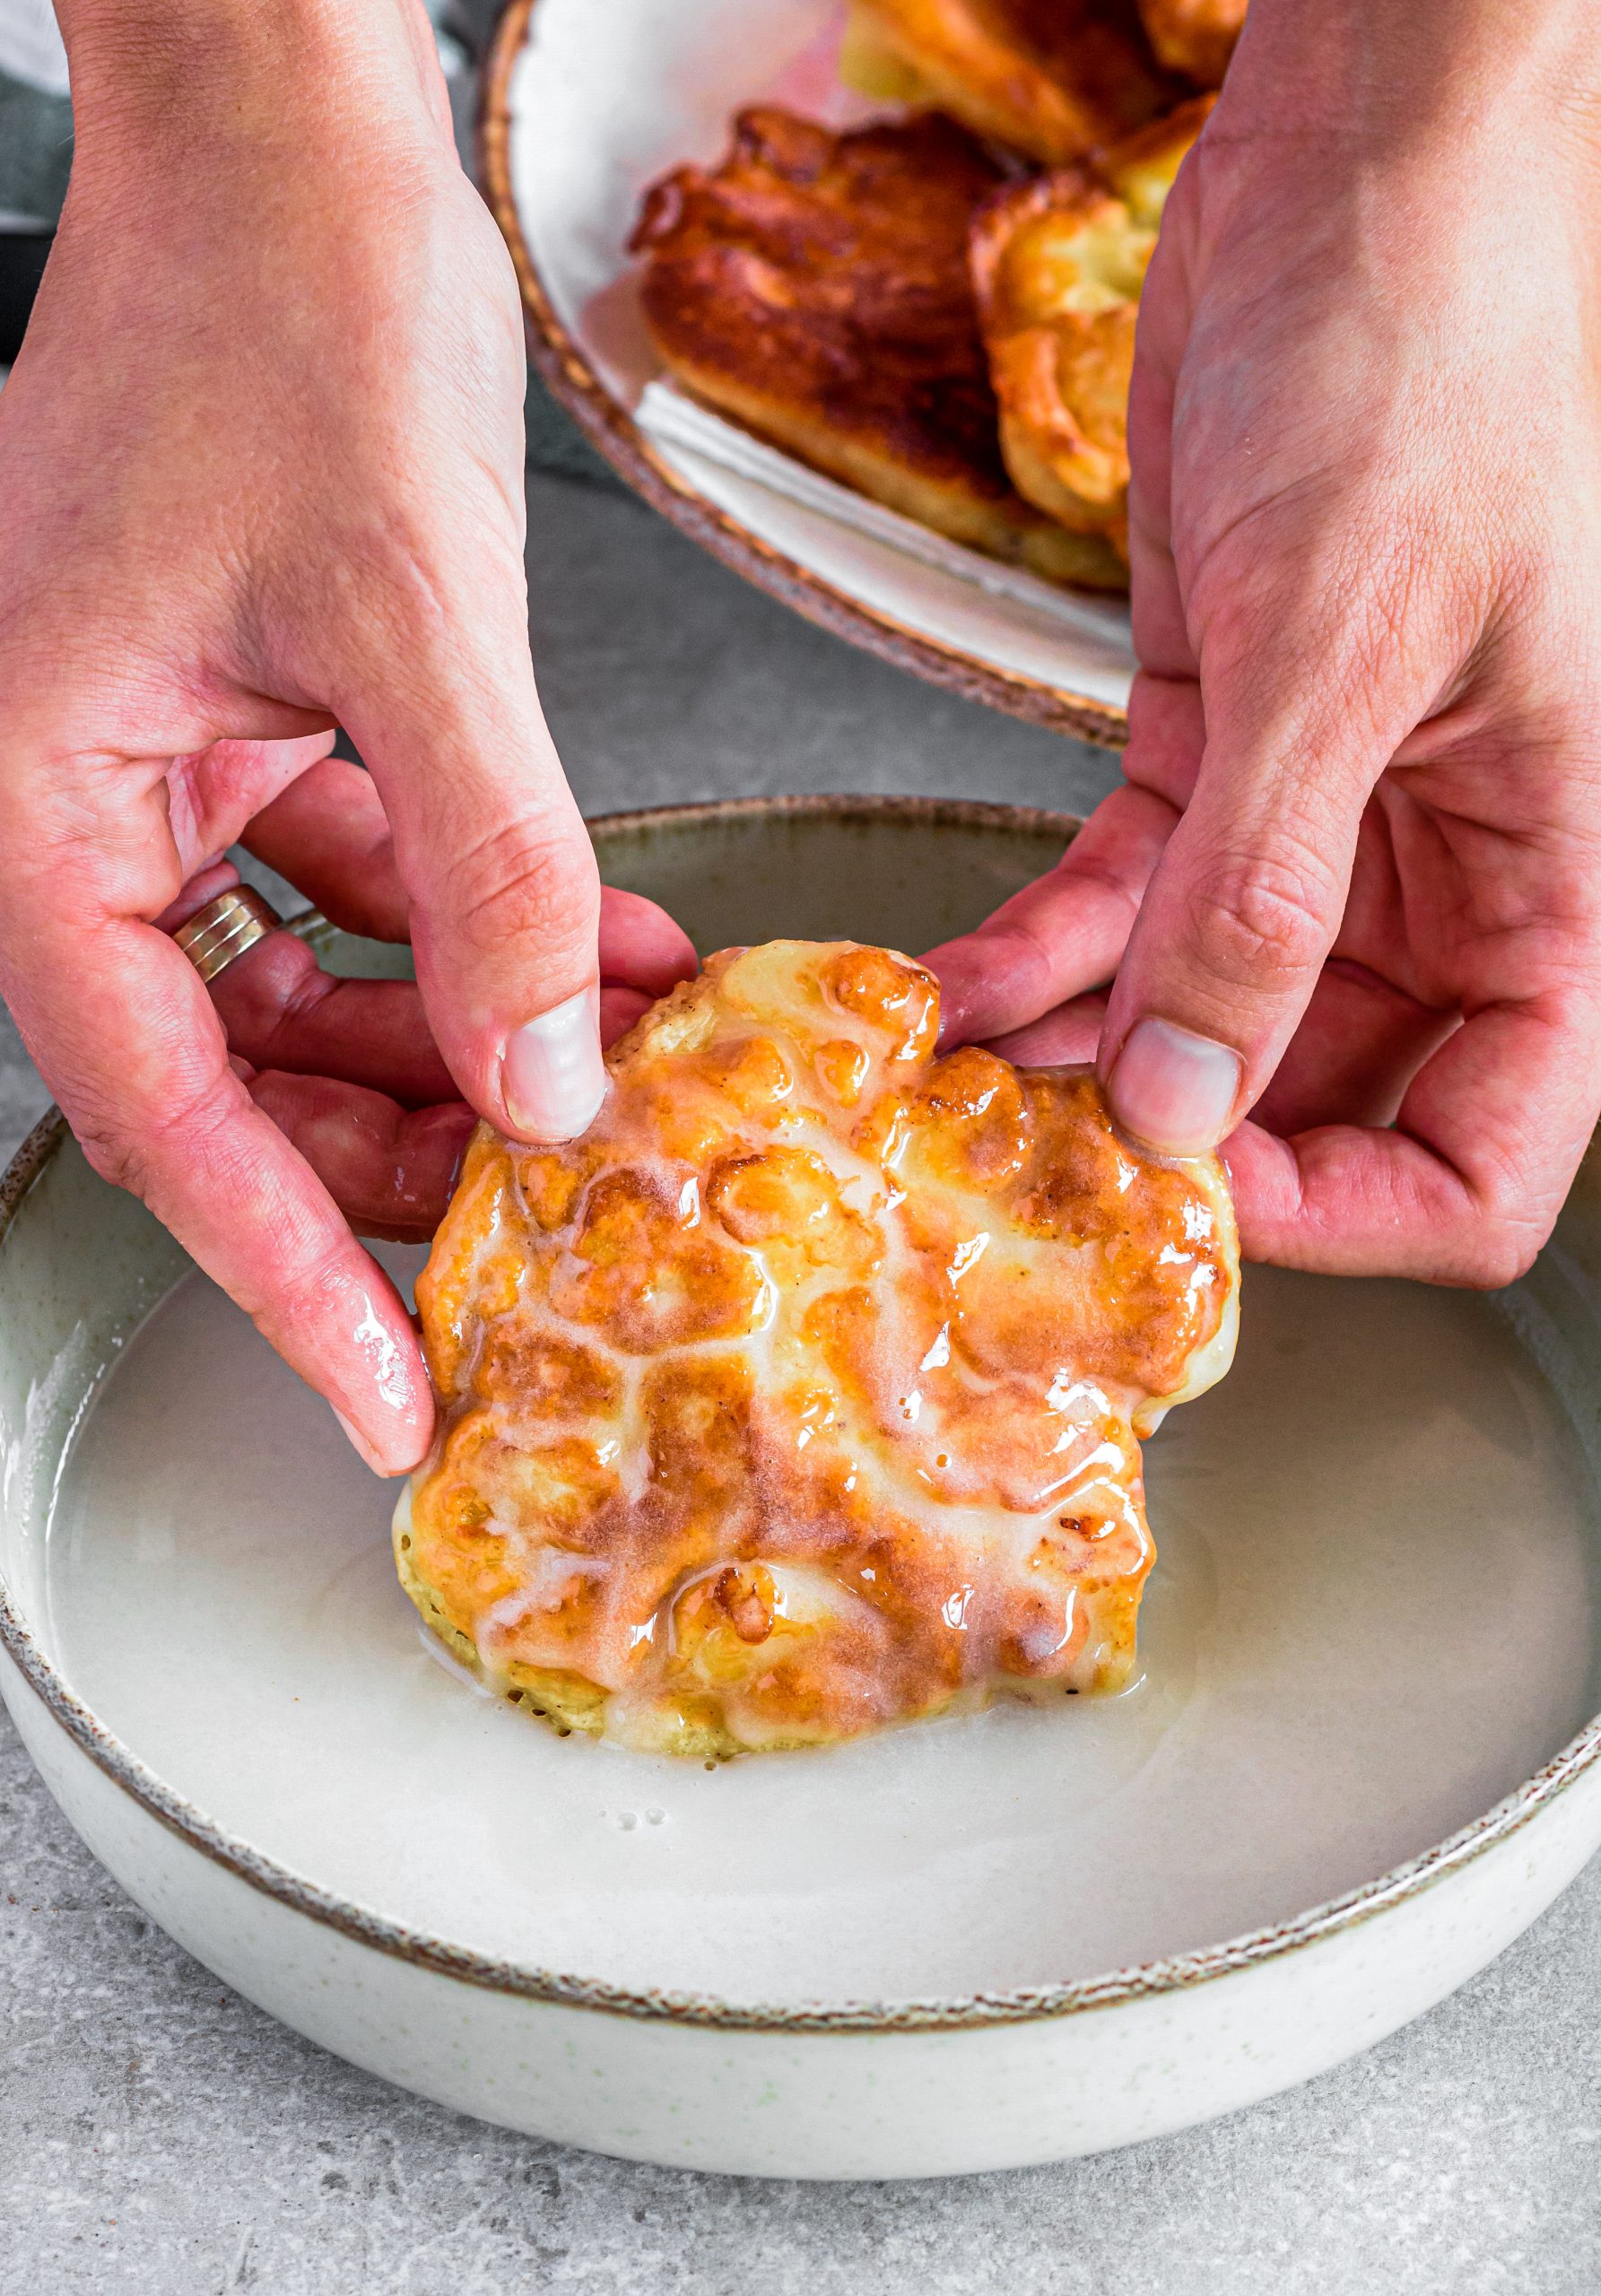 Dip the fritters into the glaze.